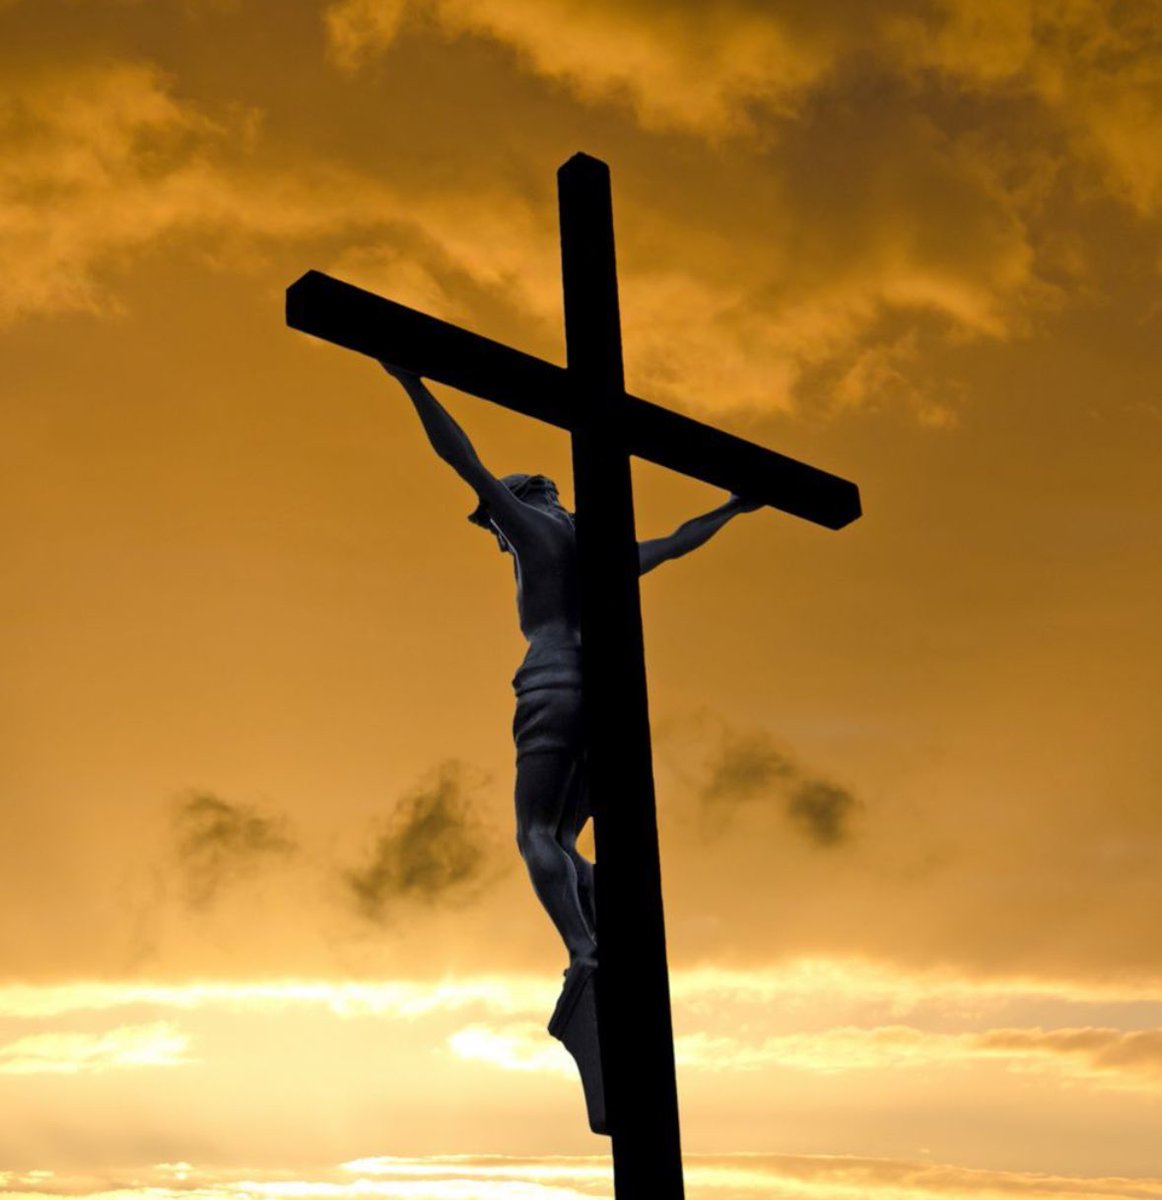 Reflecting on Good Friday. Today, we remember the solemn sacrifice of Jesus Christ on the cross. It's a time to contemplate love, forgiveness, and redemption. Romans 5:8 - 'But God demonstrates his own love for us in this: While we were still sinners, Christ died for us.”